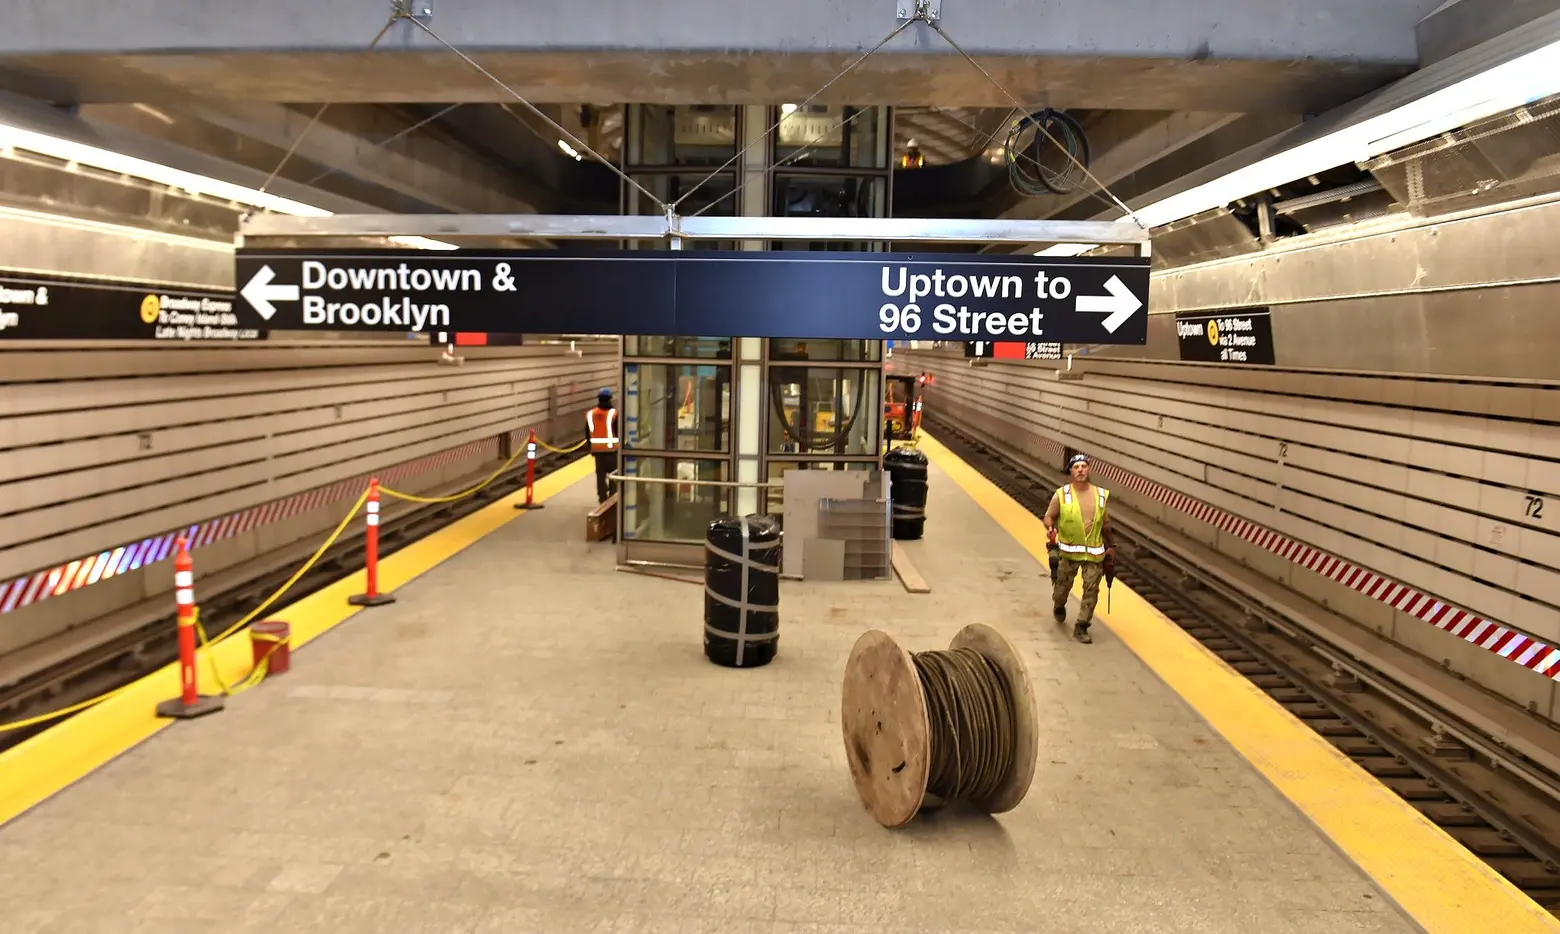 Second Avenue Subway officially opens to the public January 1, 2017!